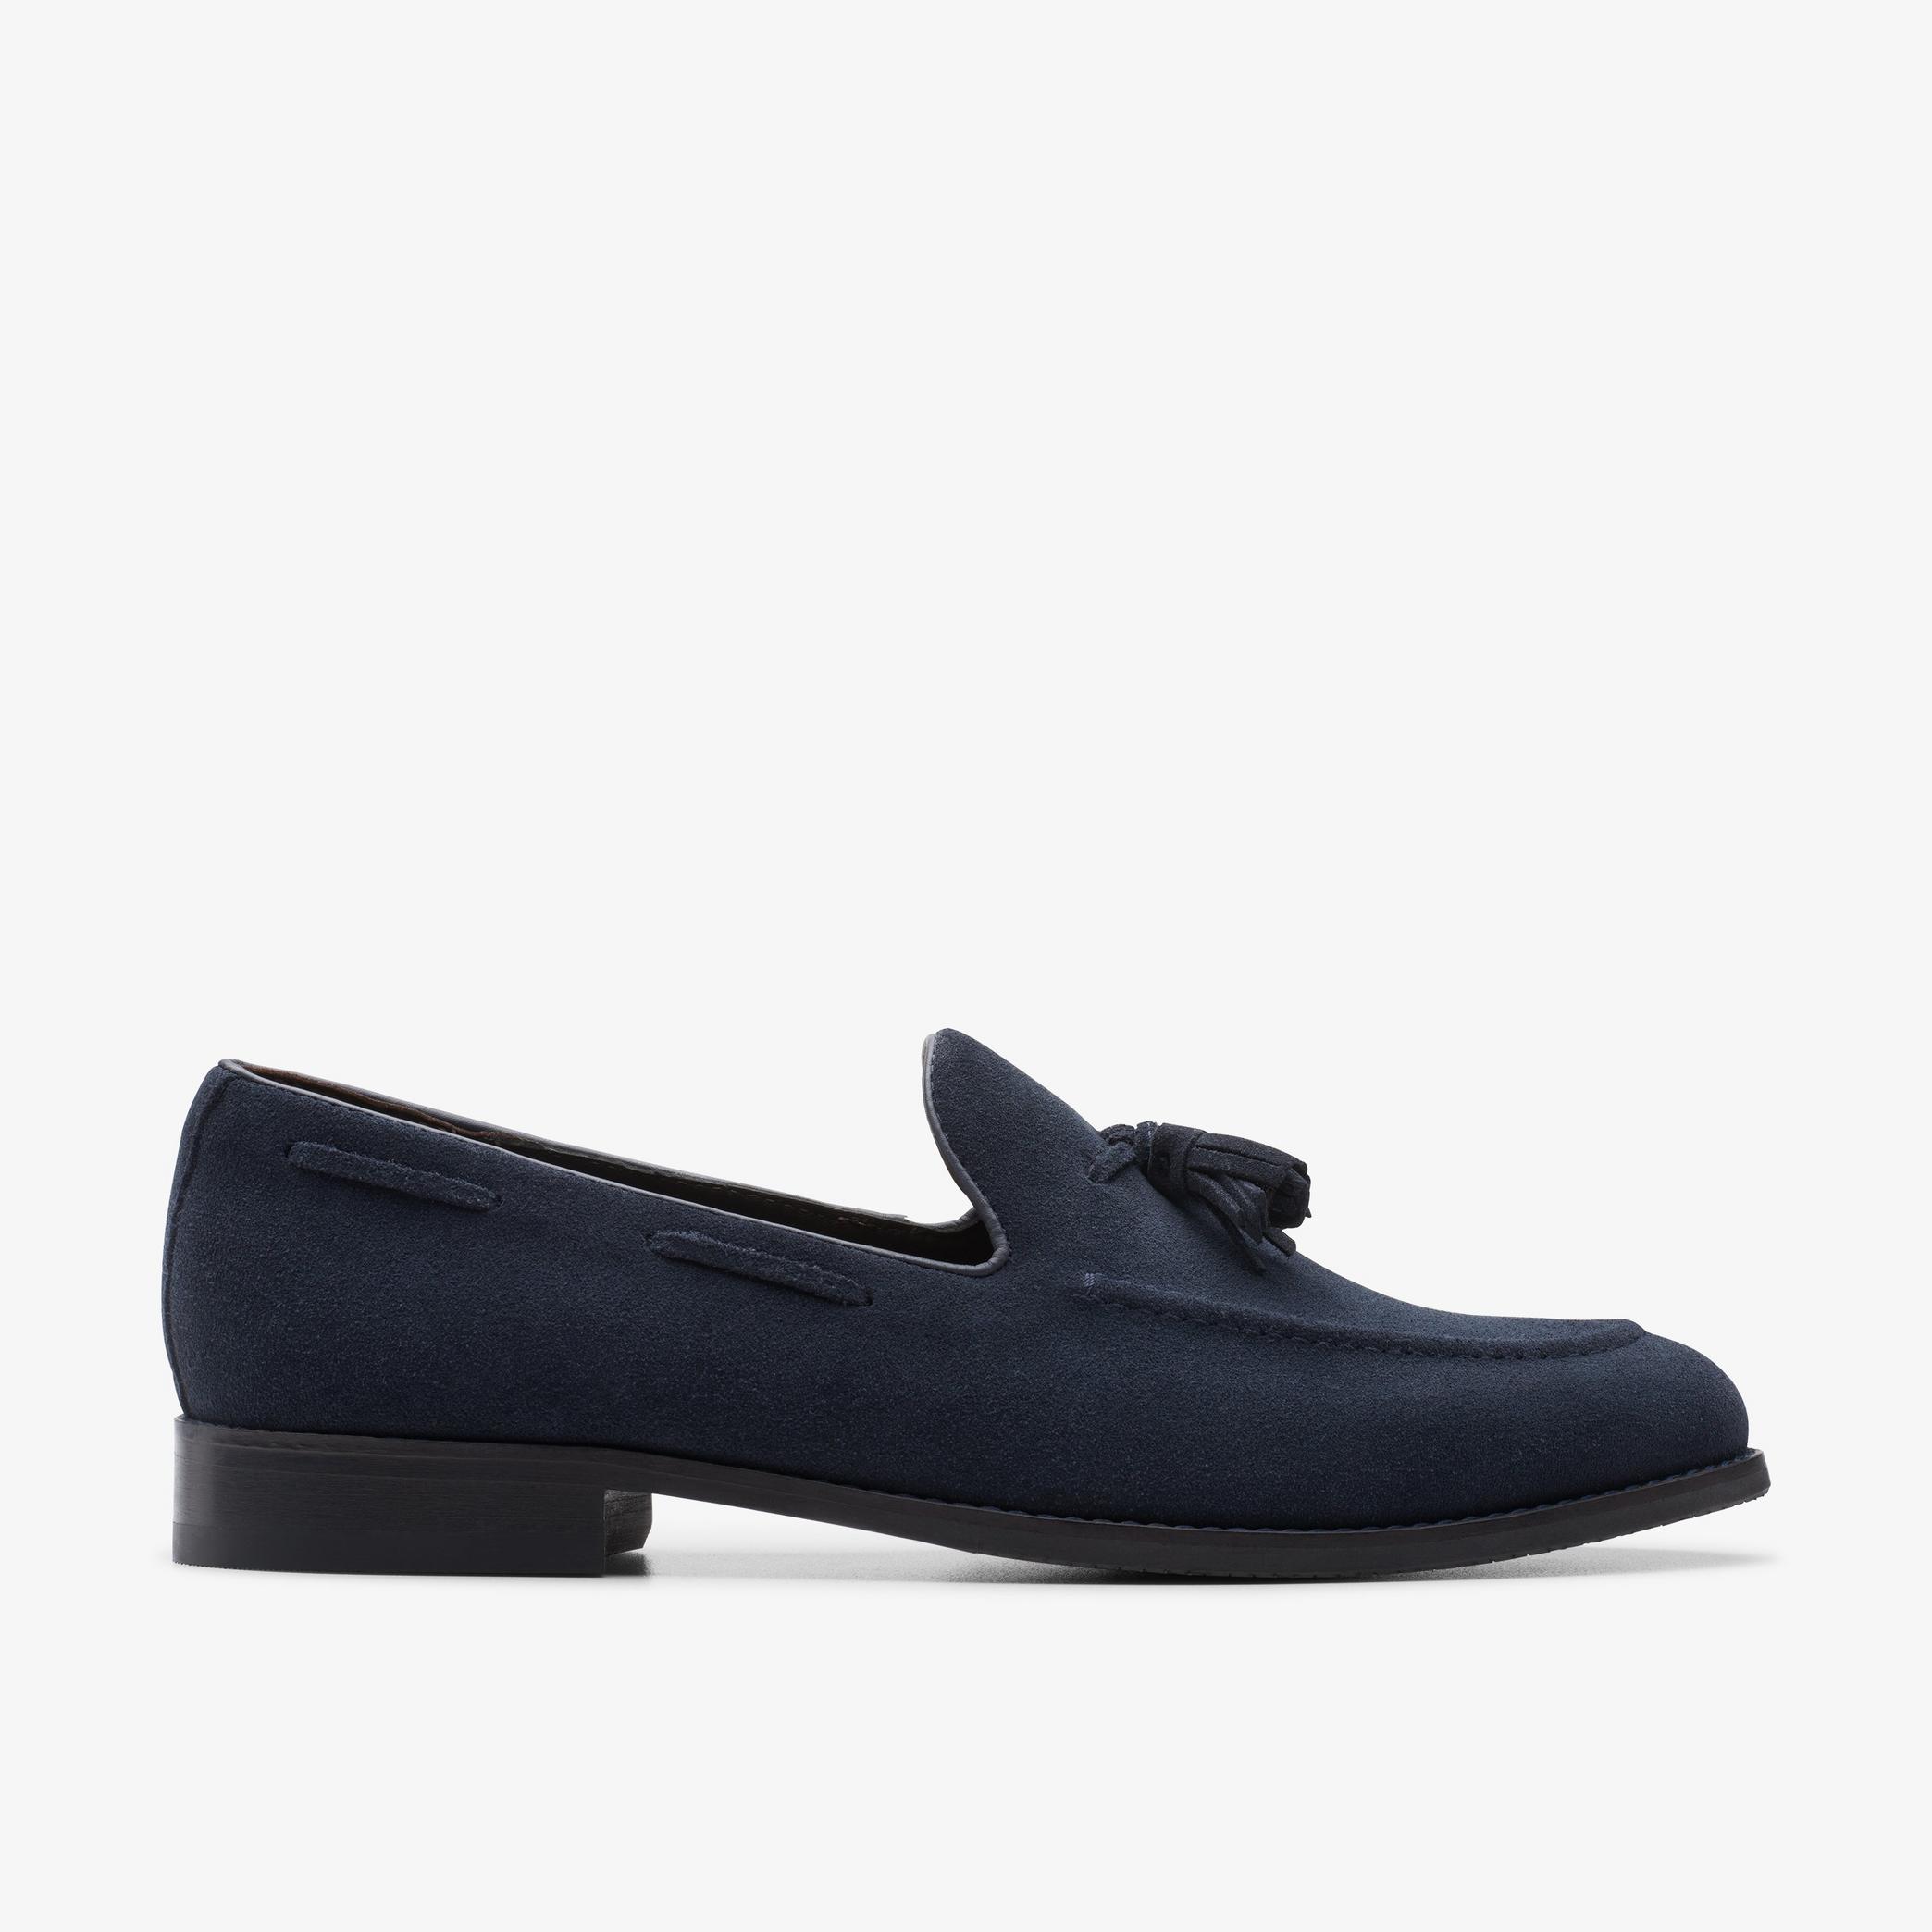 Craft Arlo Trim Navy Suede Shoes, view 1 of 7